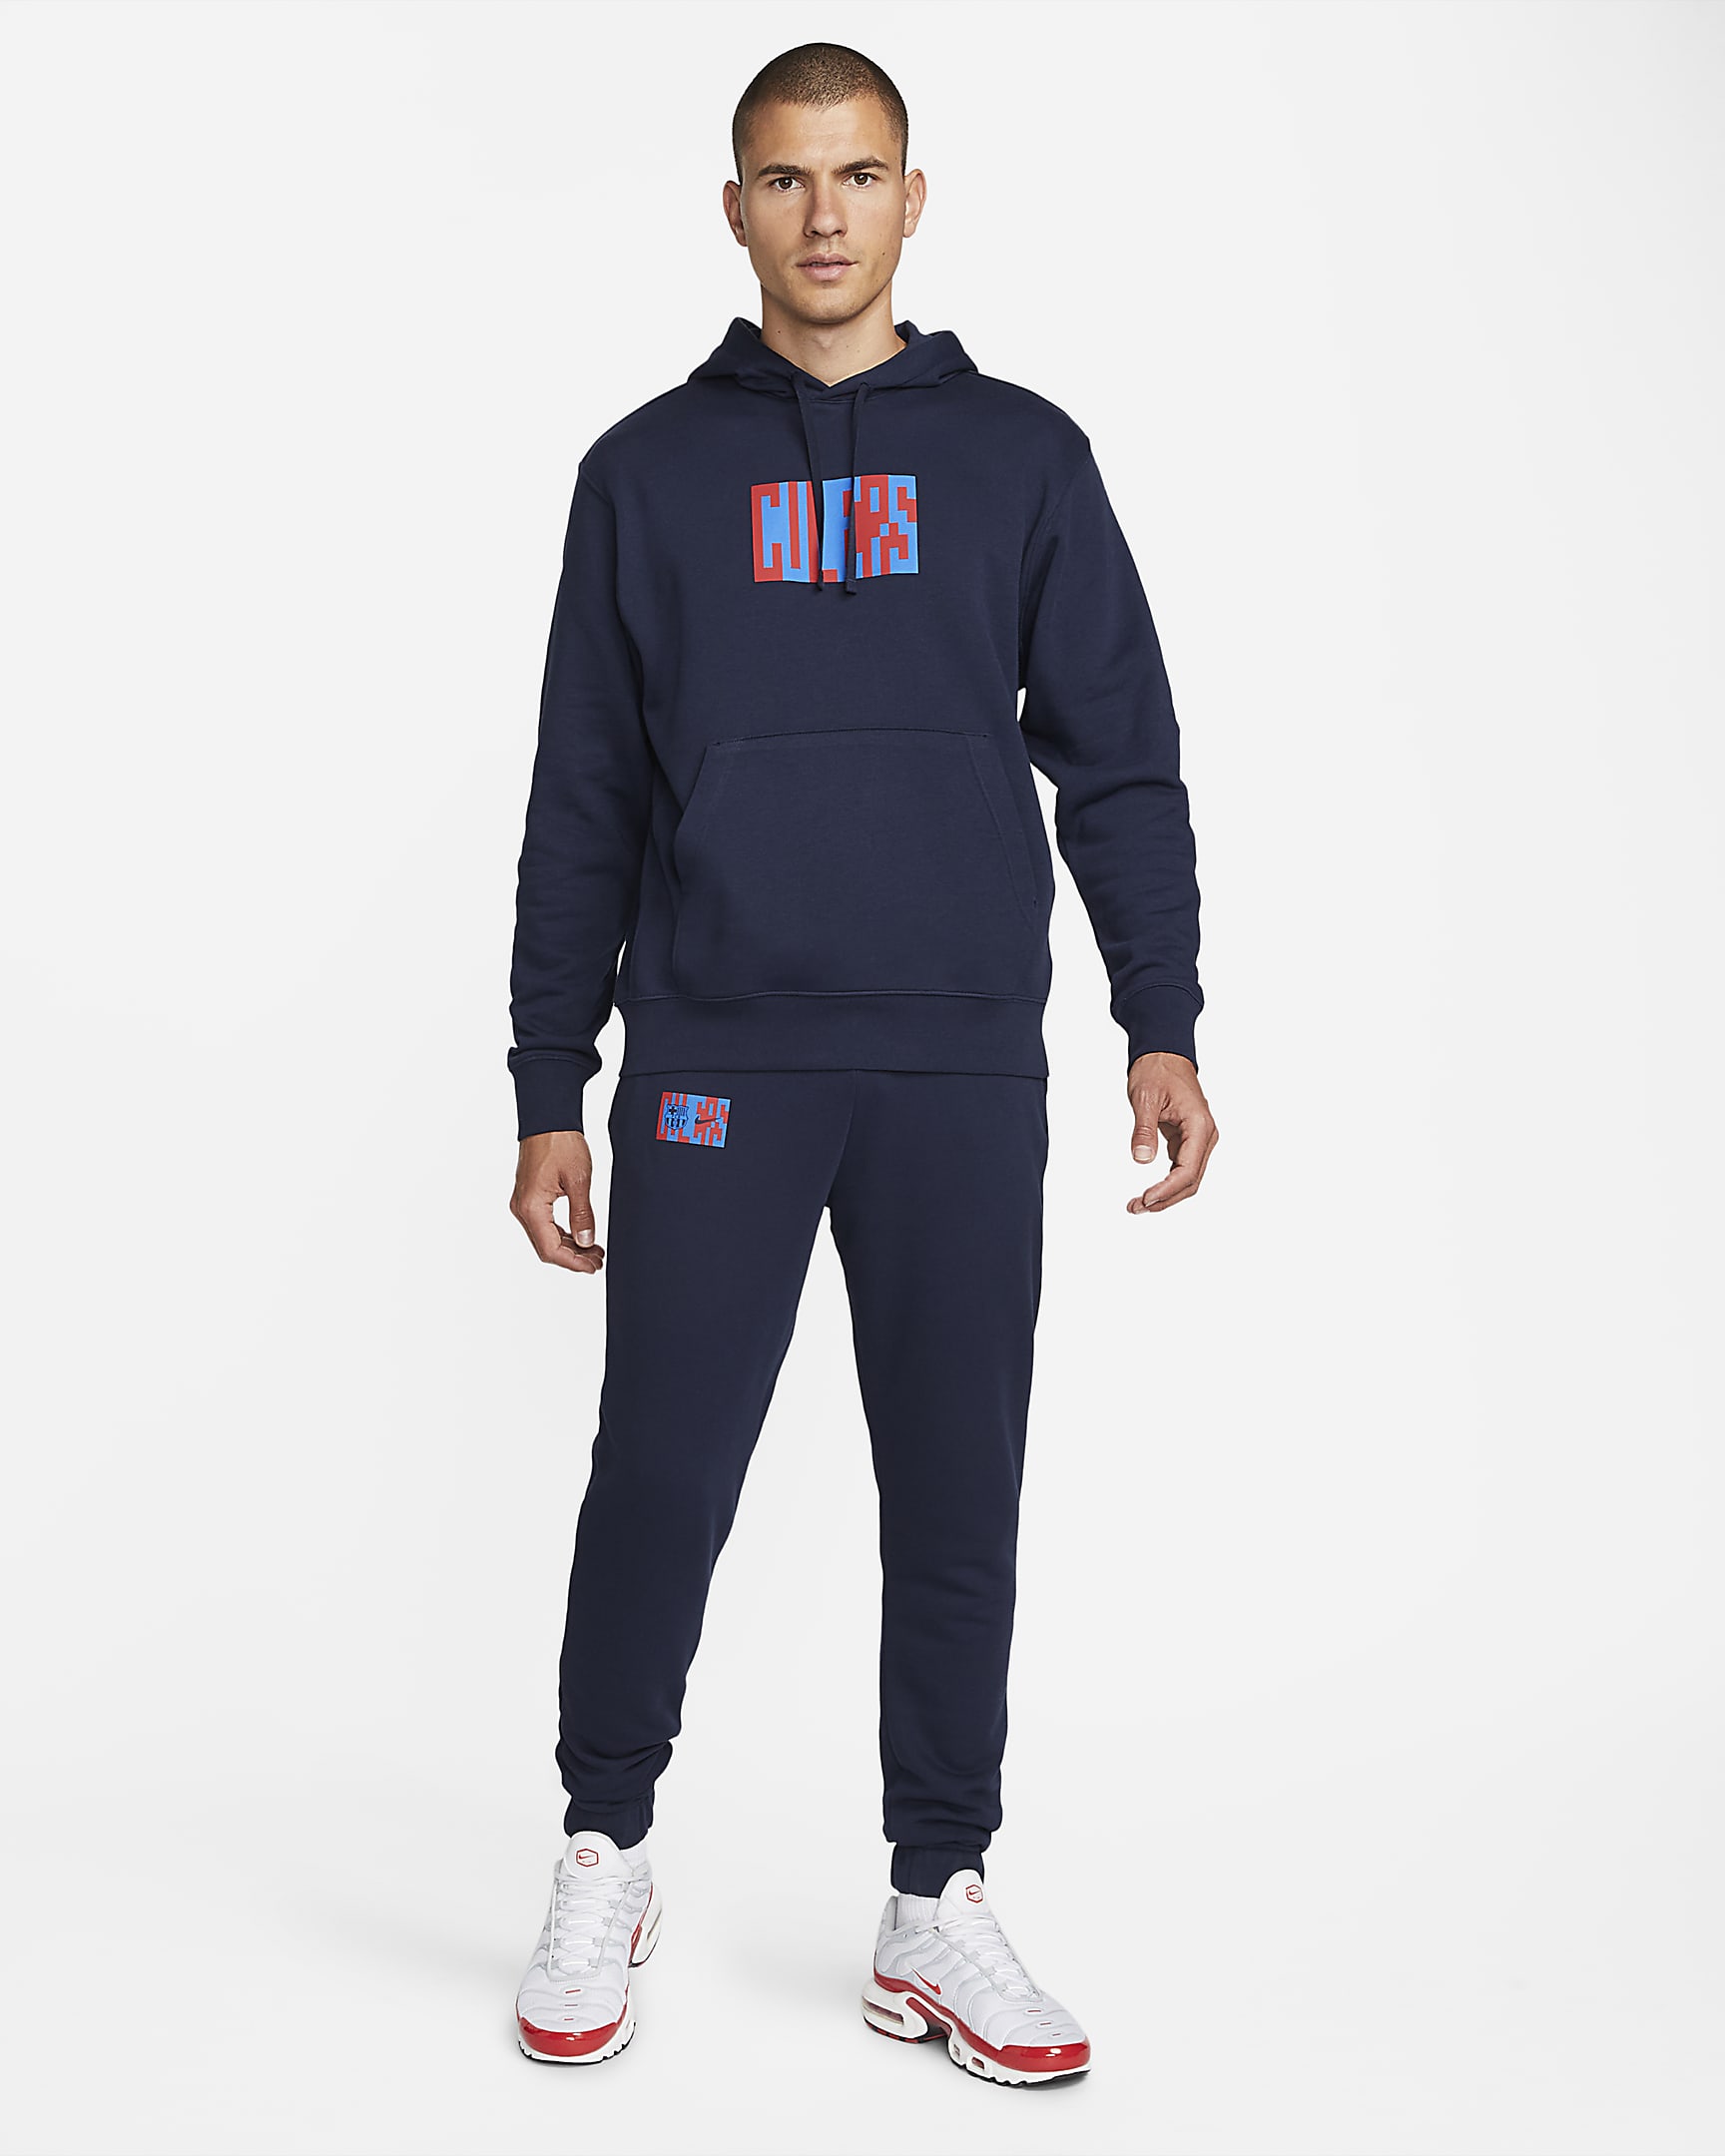 FC Barcelona Men's French Terry Soccer Hoodie. Nike.com